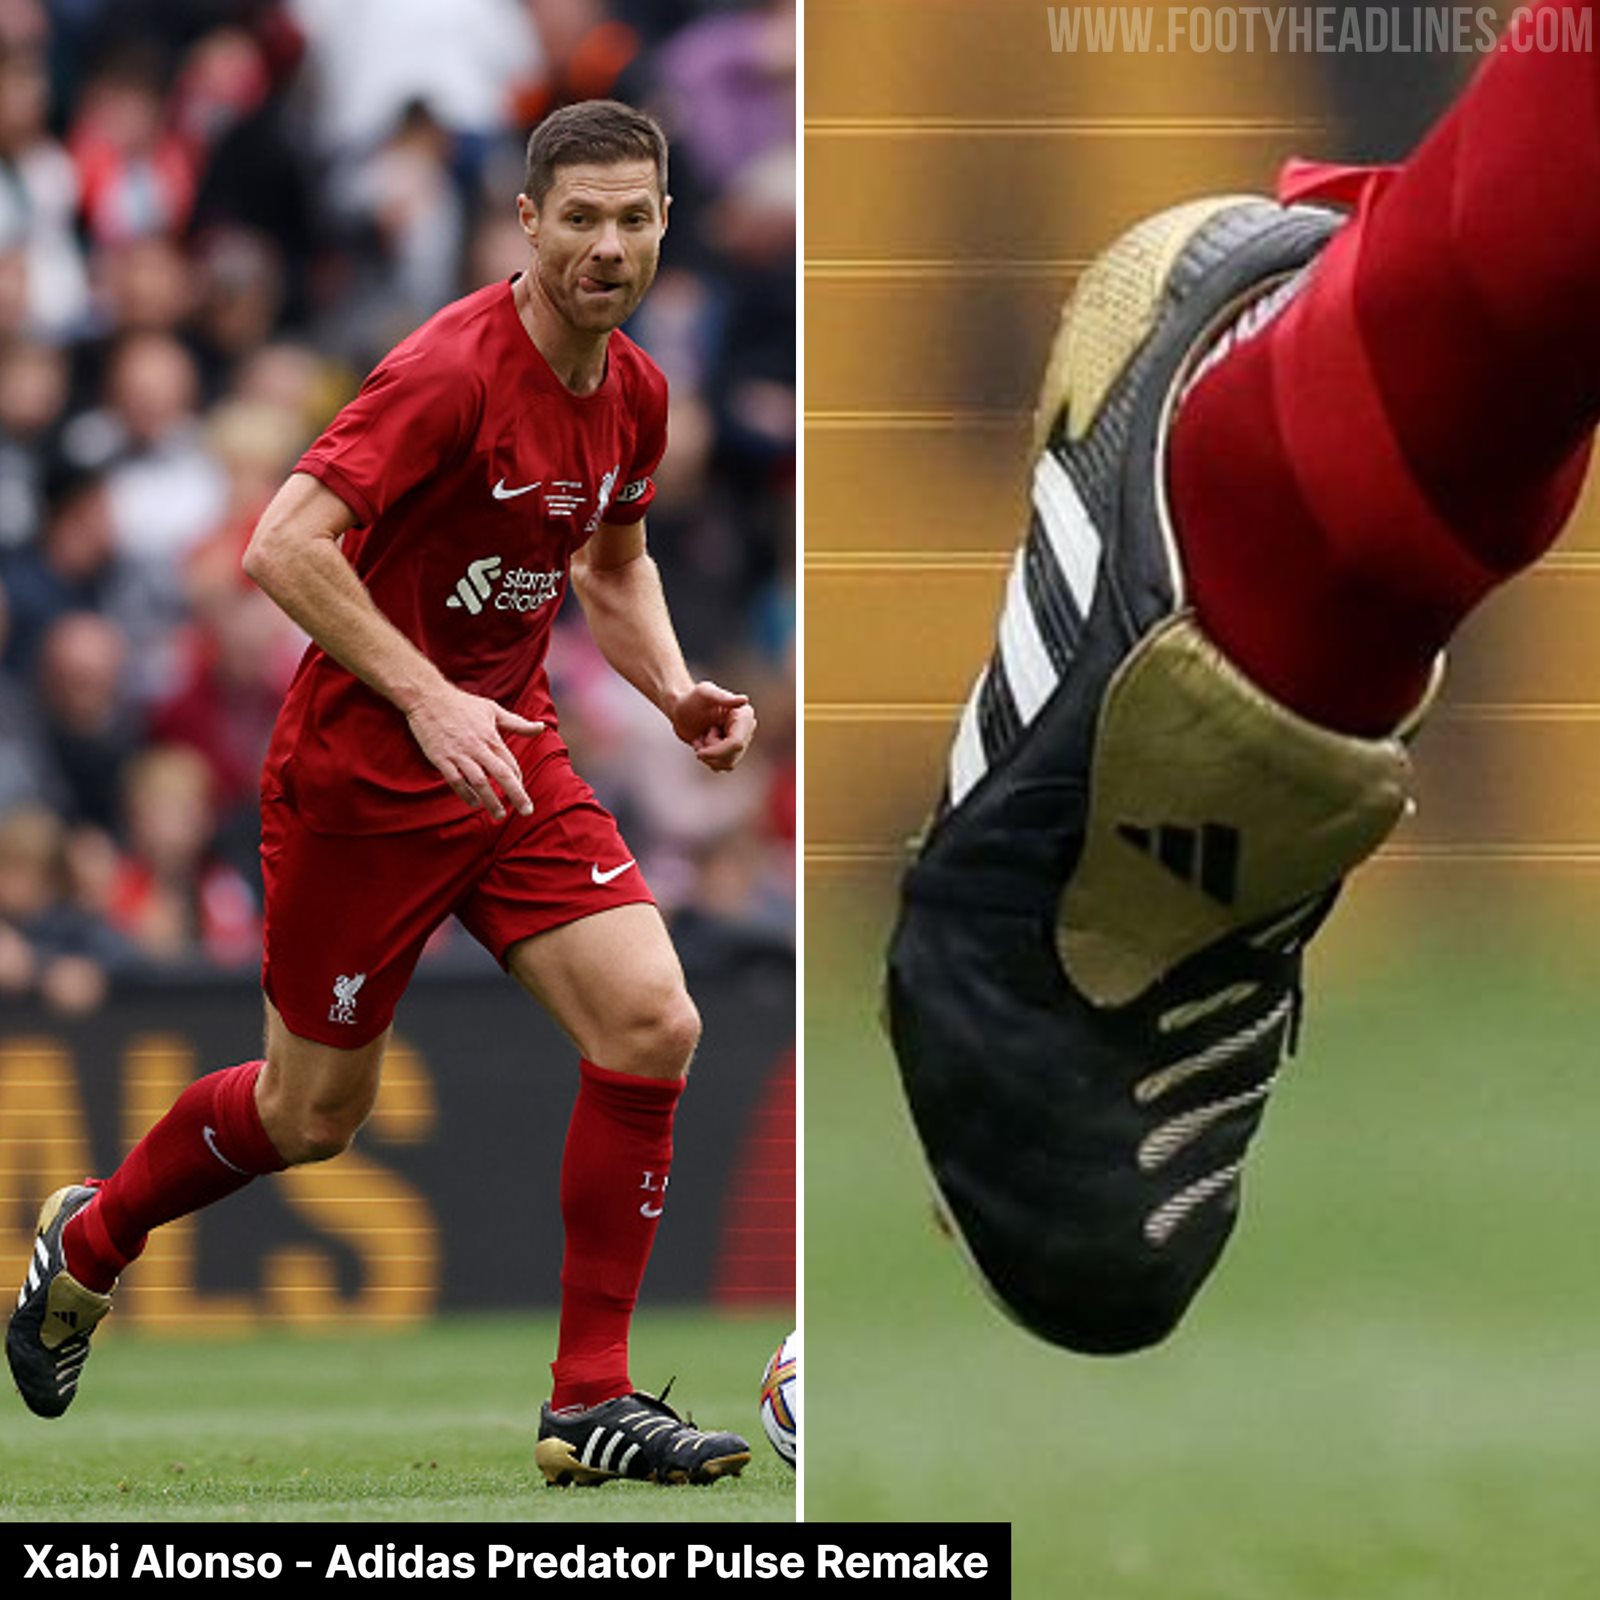 Xabi Alonso Wears Classy Predator Boots - Liverpool vs Manchester United Legends Boots - Footy Headlines